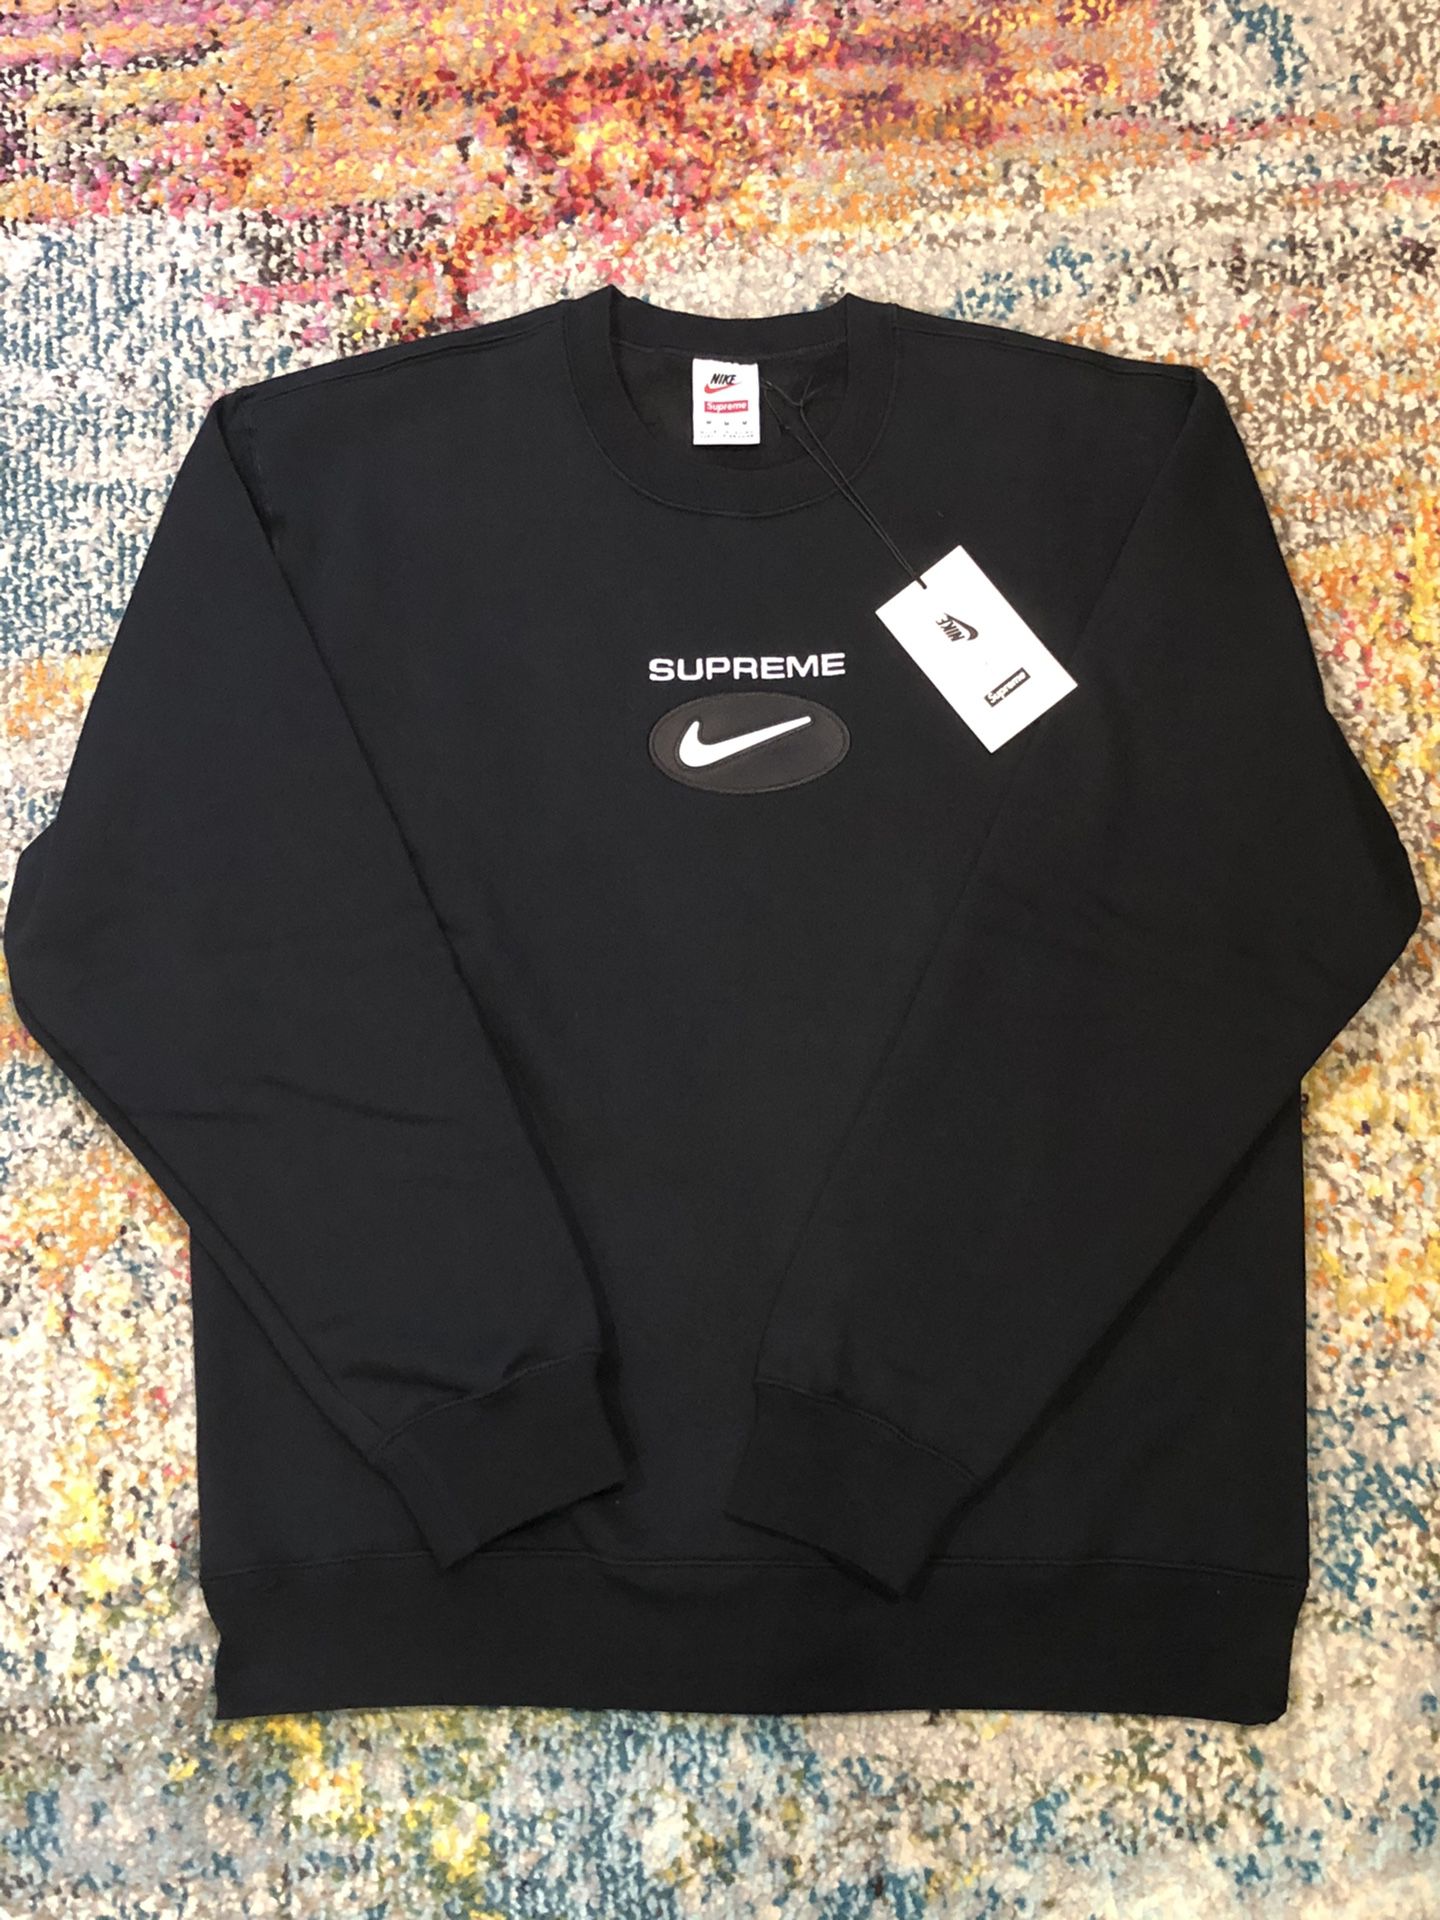 Nike Supreme Jewel Crewneck Black for Sale in Daly City, CA - OfferUp